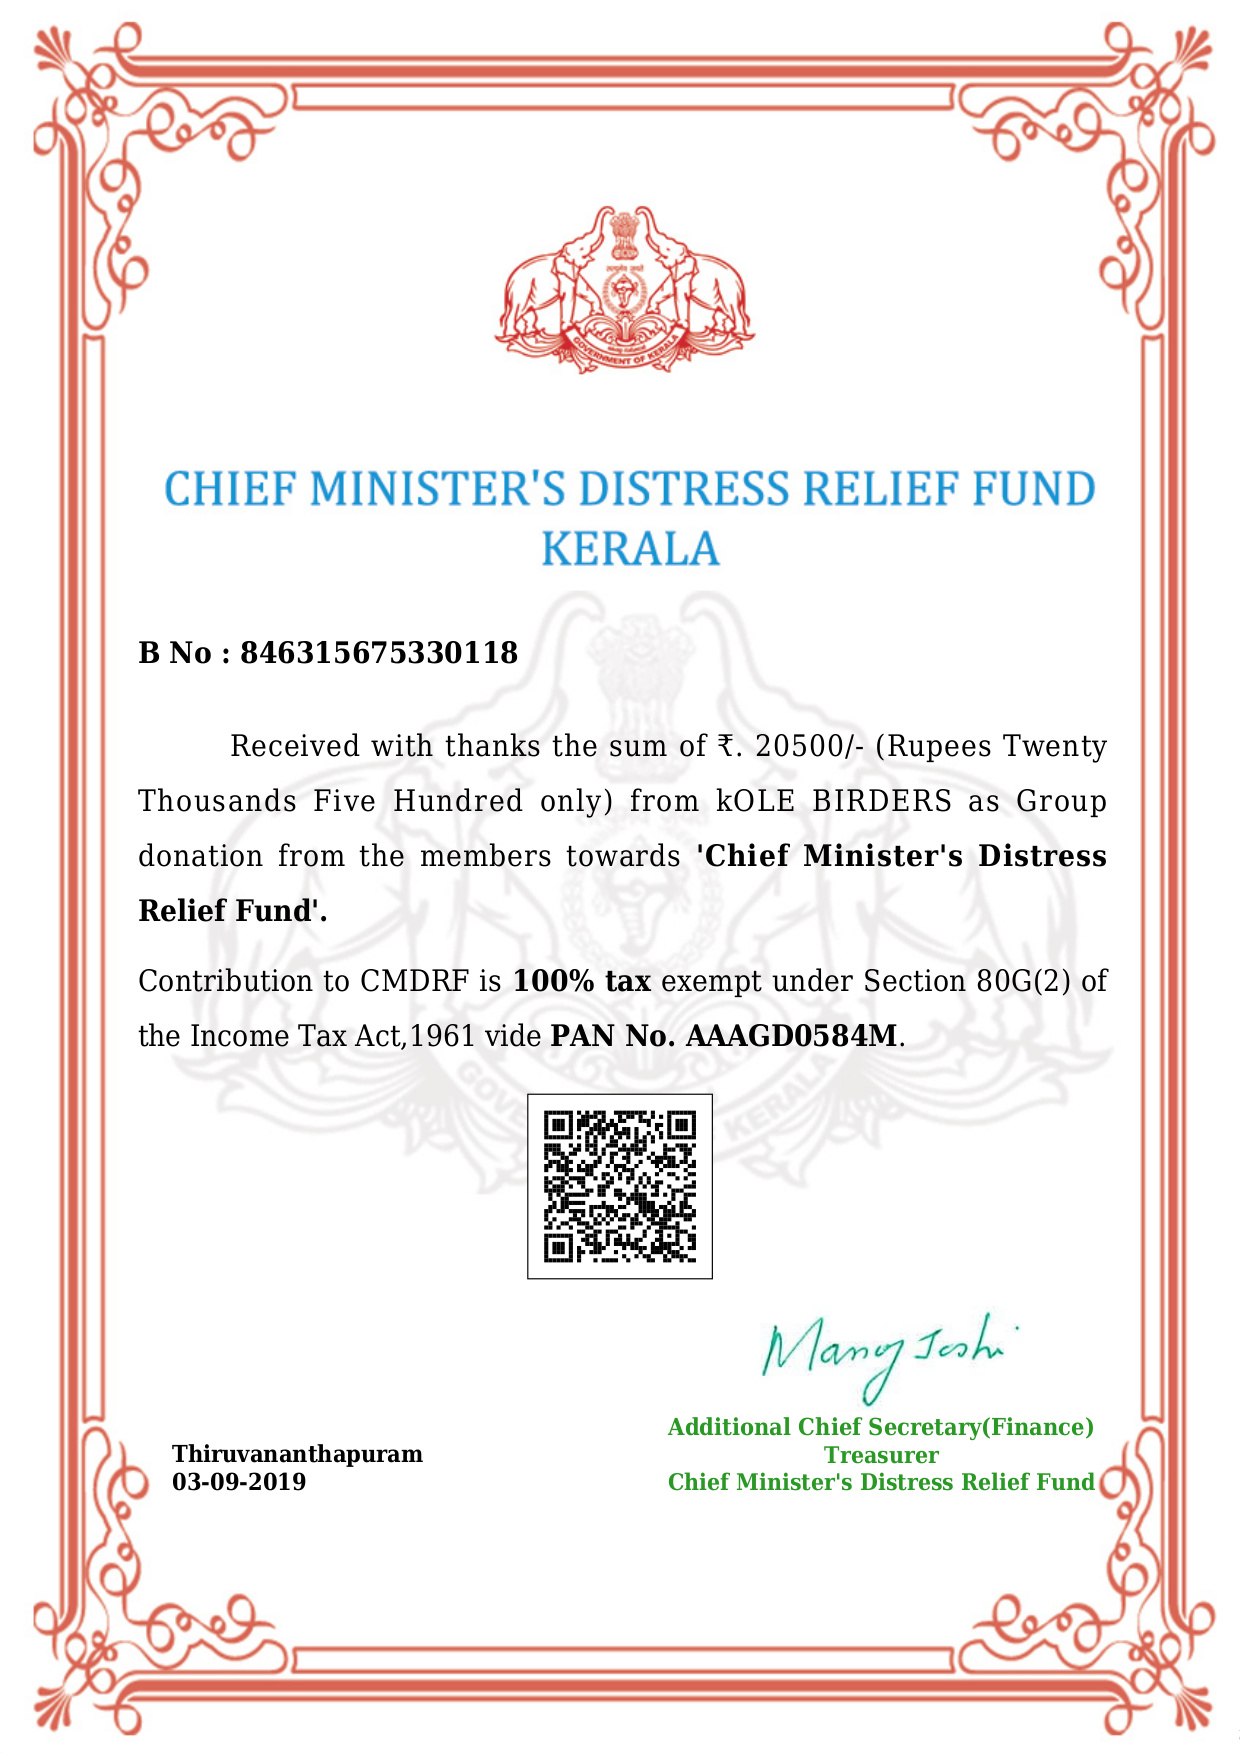 Kole Birders Contribution towards Chief Minister’s Distress Relief Fund